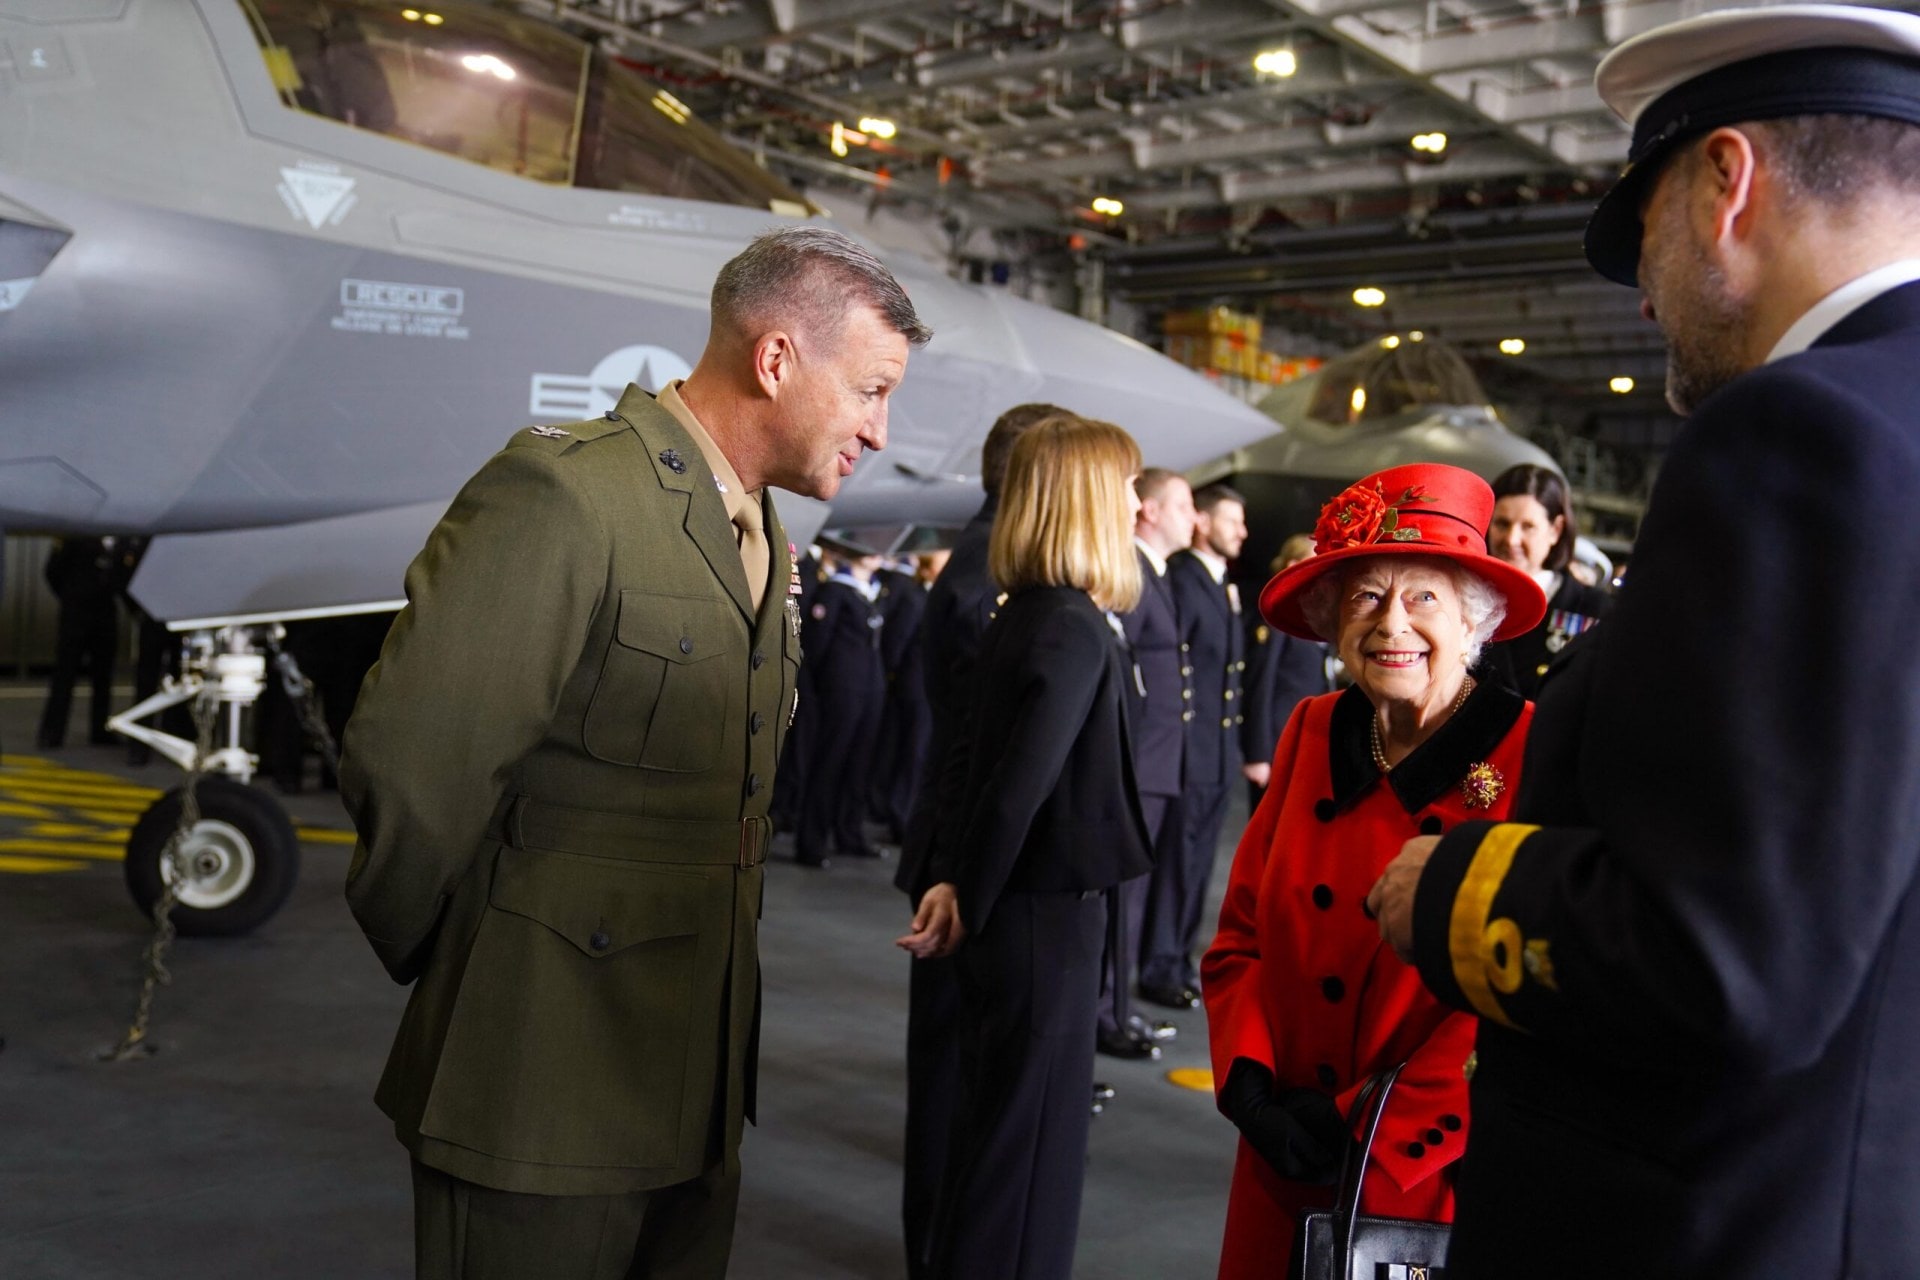 Queen Elizabeth II wearing a red coat and speaking with two of the crew of the HMS Queen Elizabeth